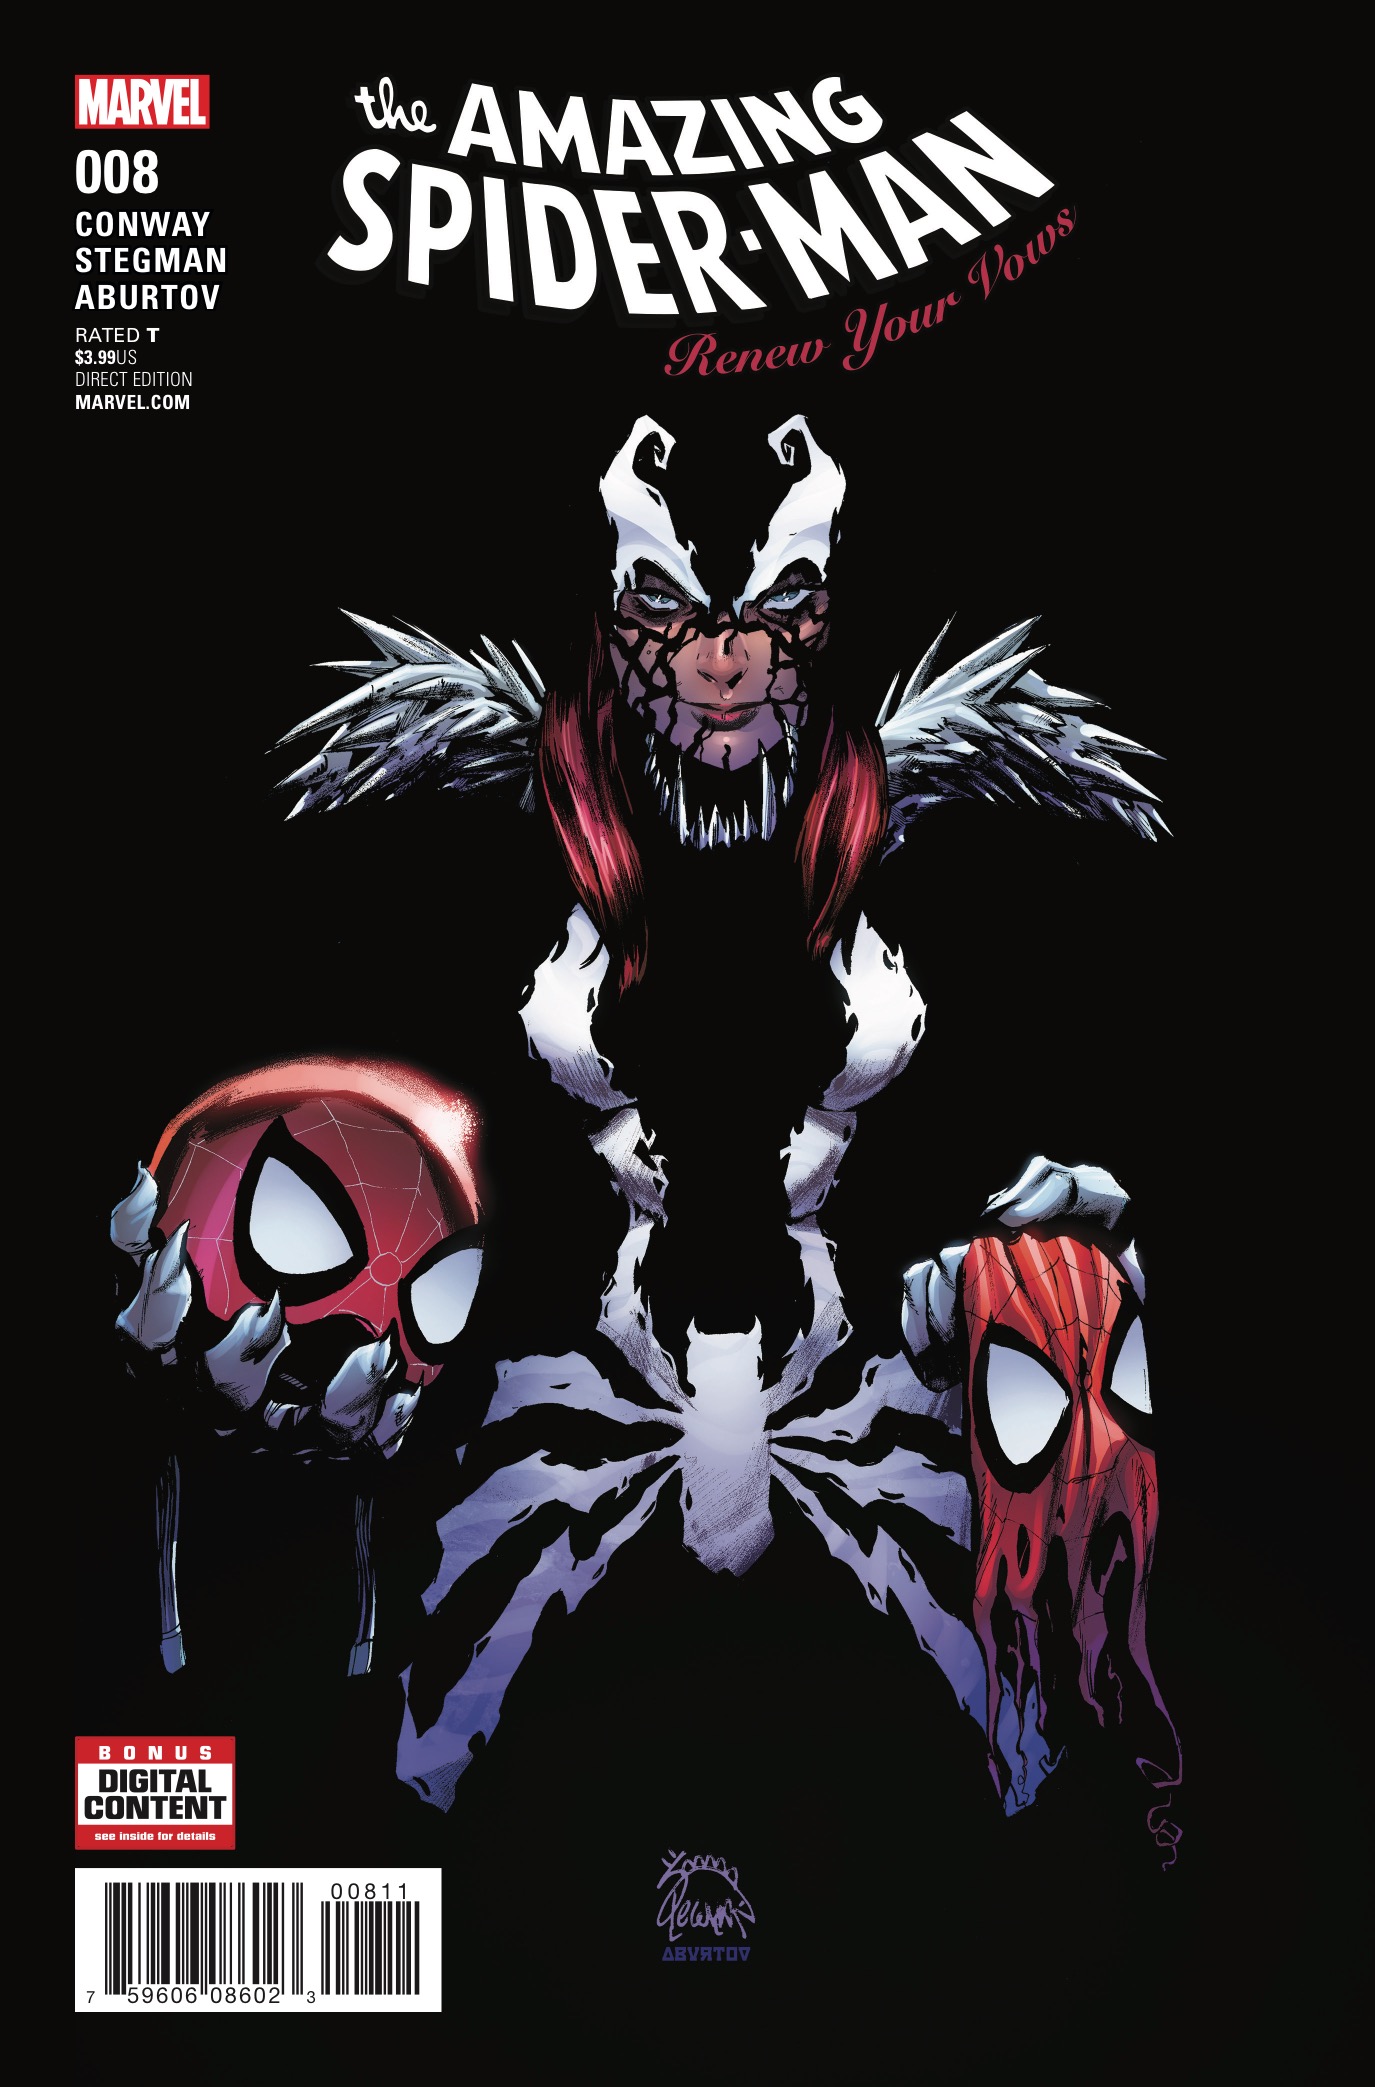 Marvel Preview: Amazing Spider-Man: Renew Your Vows #8